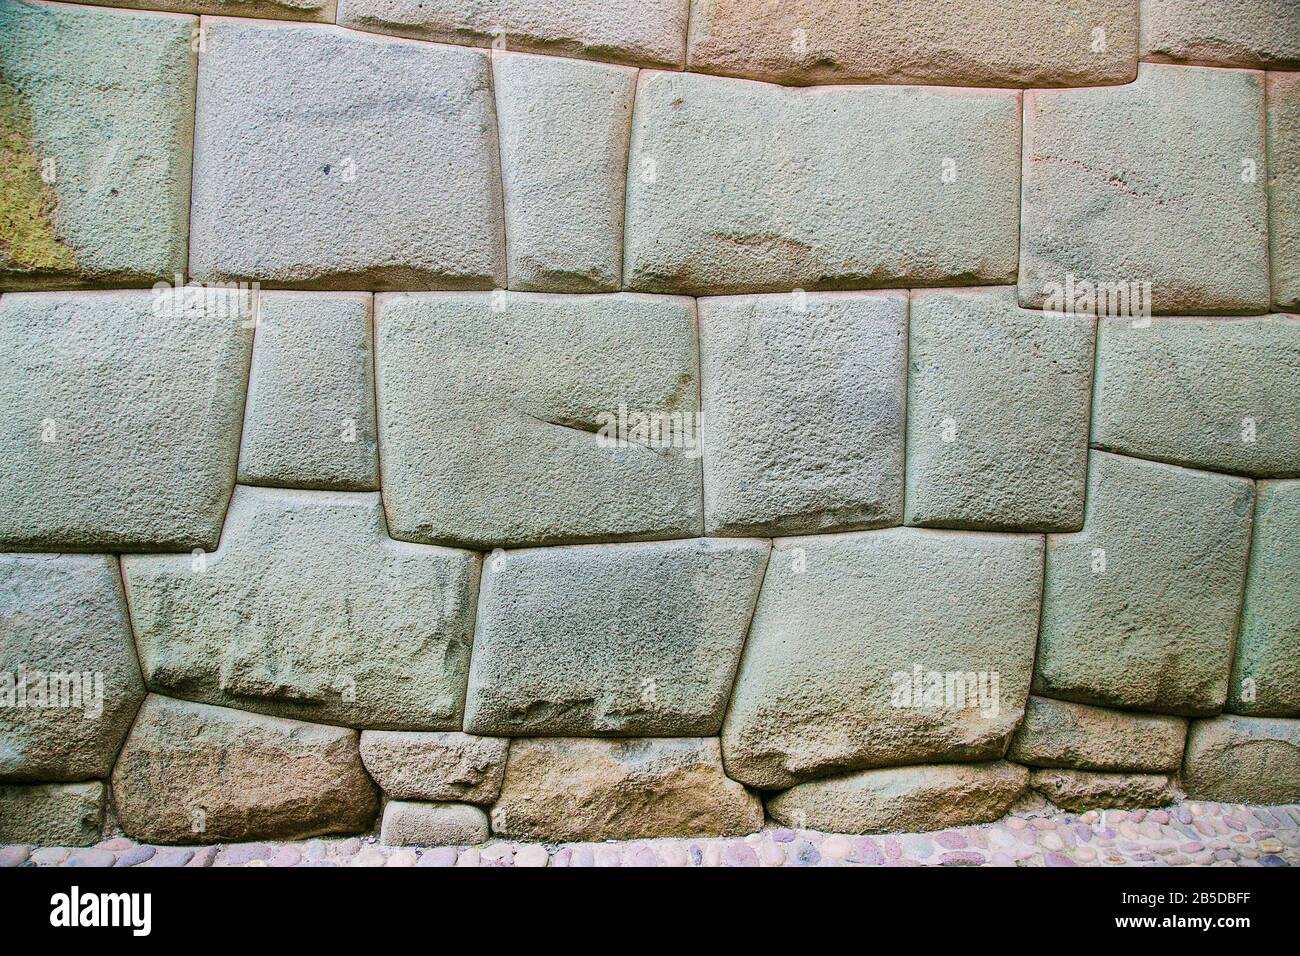 Incredible Inca Wall on Hatun Rumiyoc Street, Famous Ancient Street in Cusco, Peru, South America, Archaeological site. Stock Photo